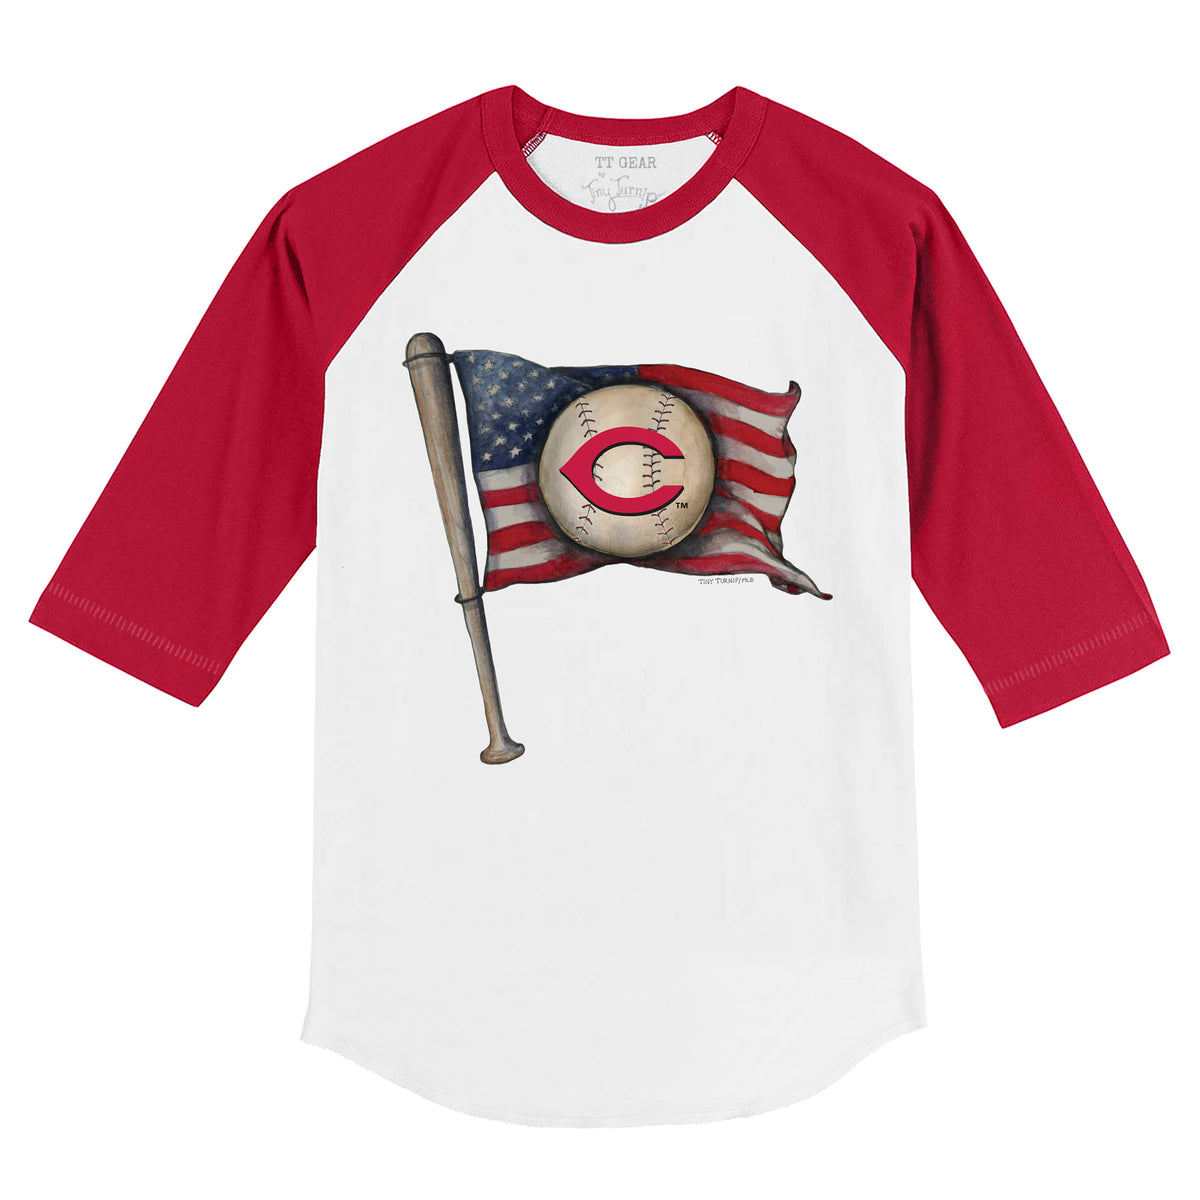 Official San Diego Padres Stars & Stripes Gear, Padres 4th of July